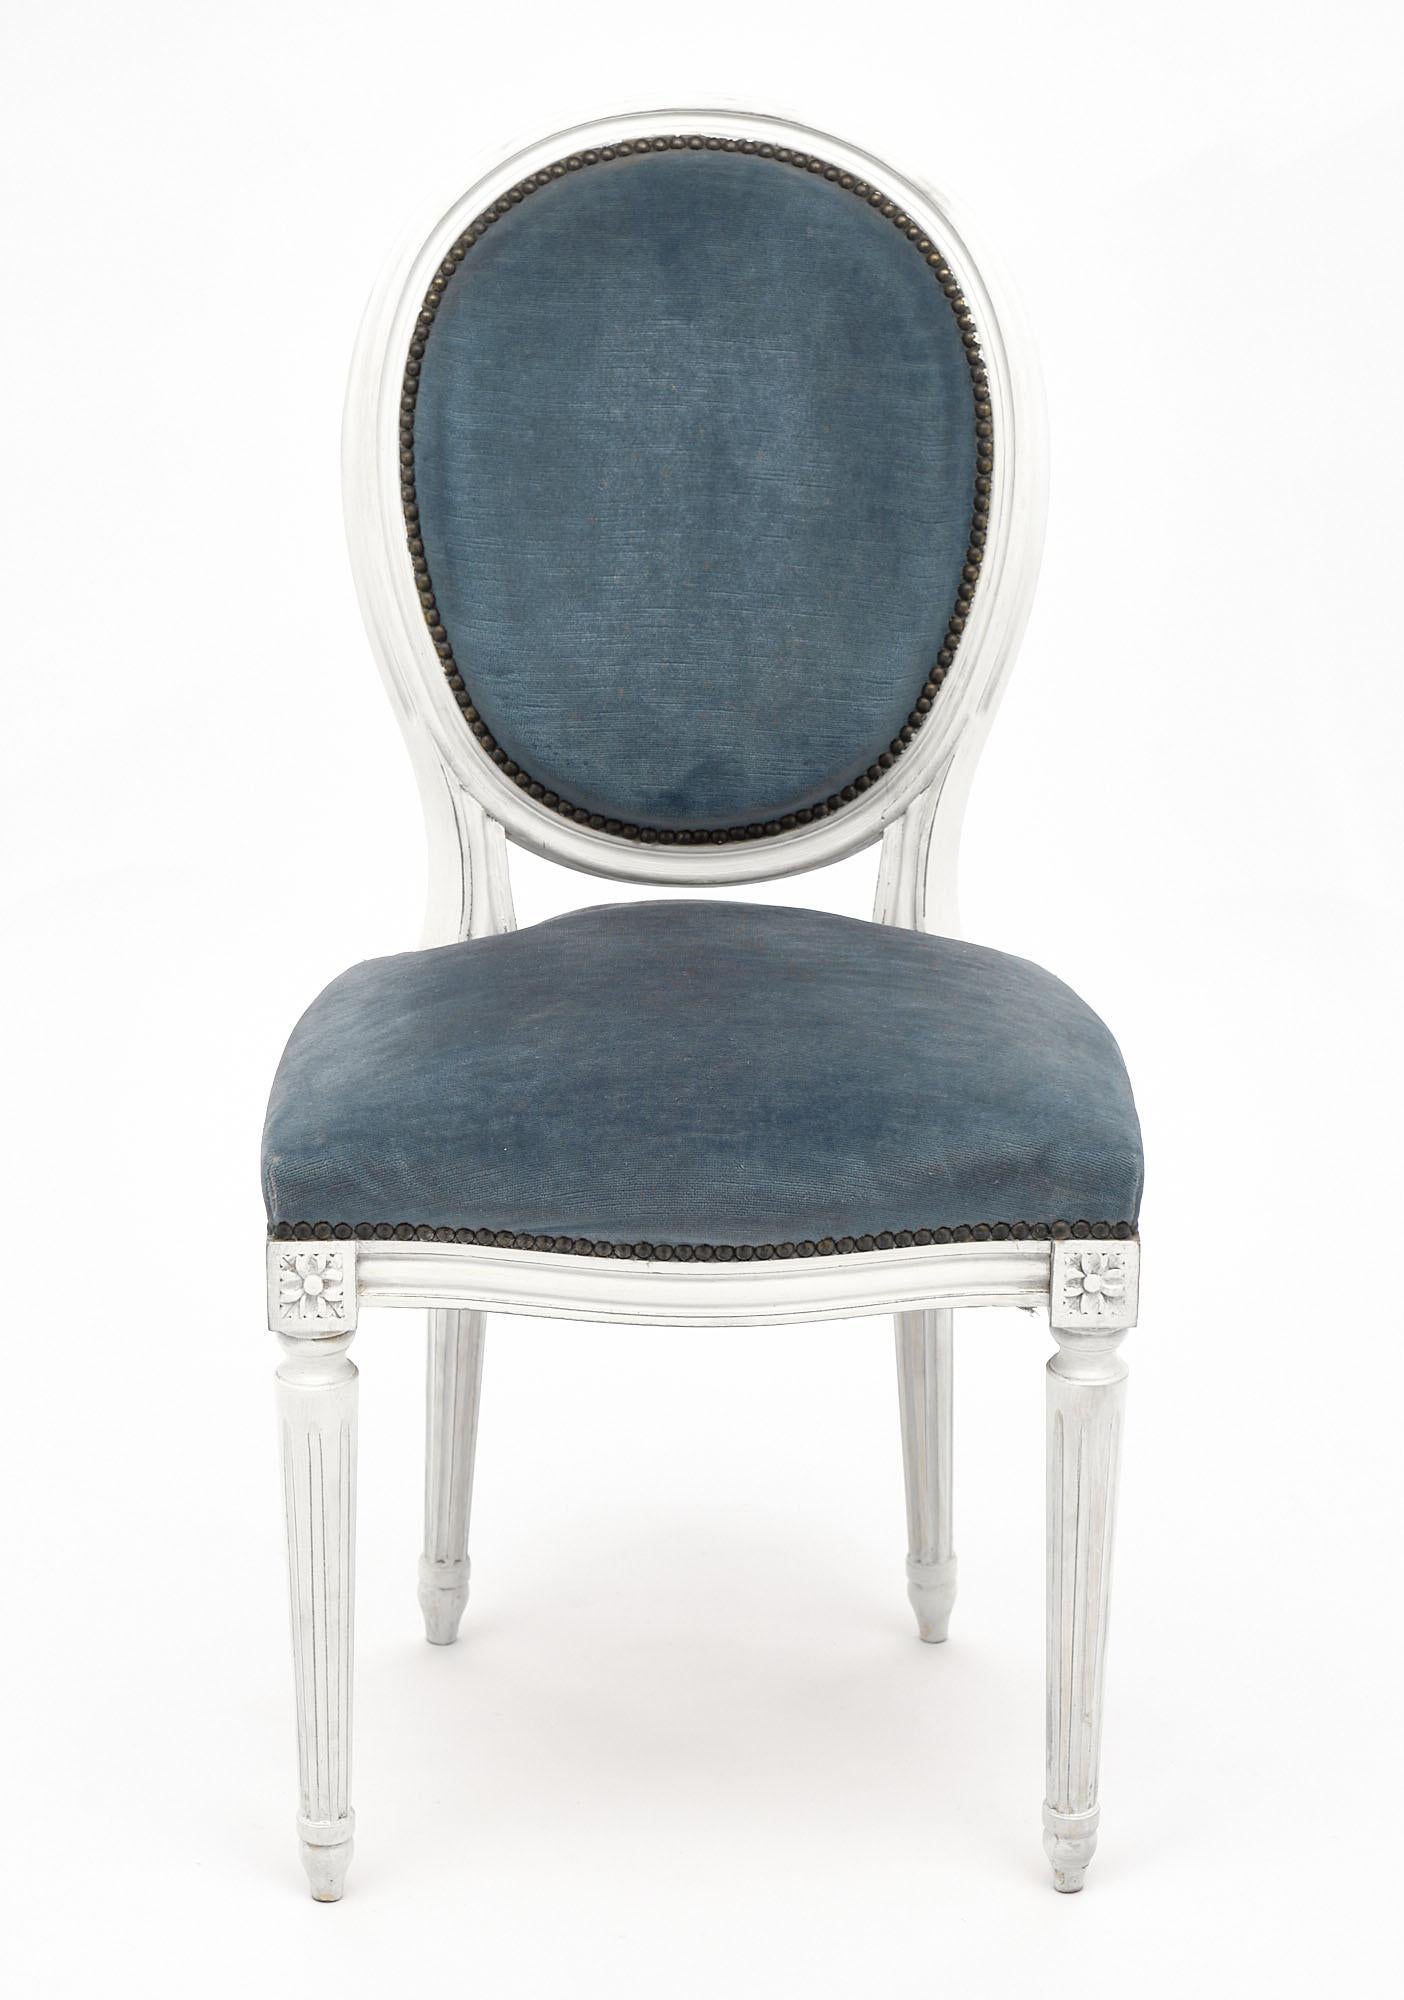 Set of four chairs from France in the Louis XVI style made with hand-carved and painted beech wood frames. The original upholstery is blue velvet and in good condition with only minor wear consistent with age. We love the hand-carved details and